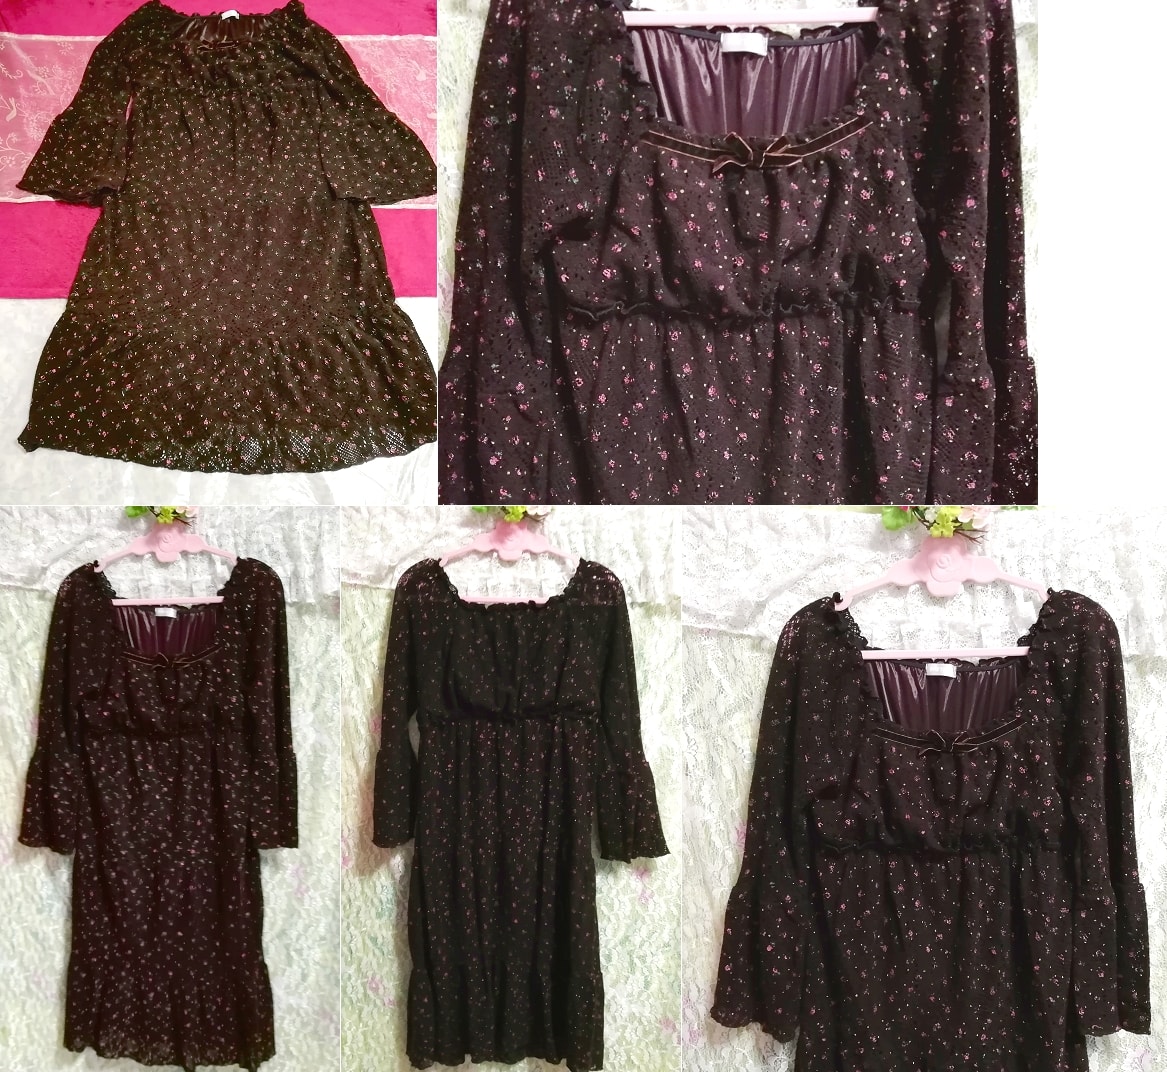 Dark brown long sleeve floral pattern flare lace negligee nightgown tunic dress, tunic, long sleeve, m size